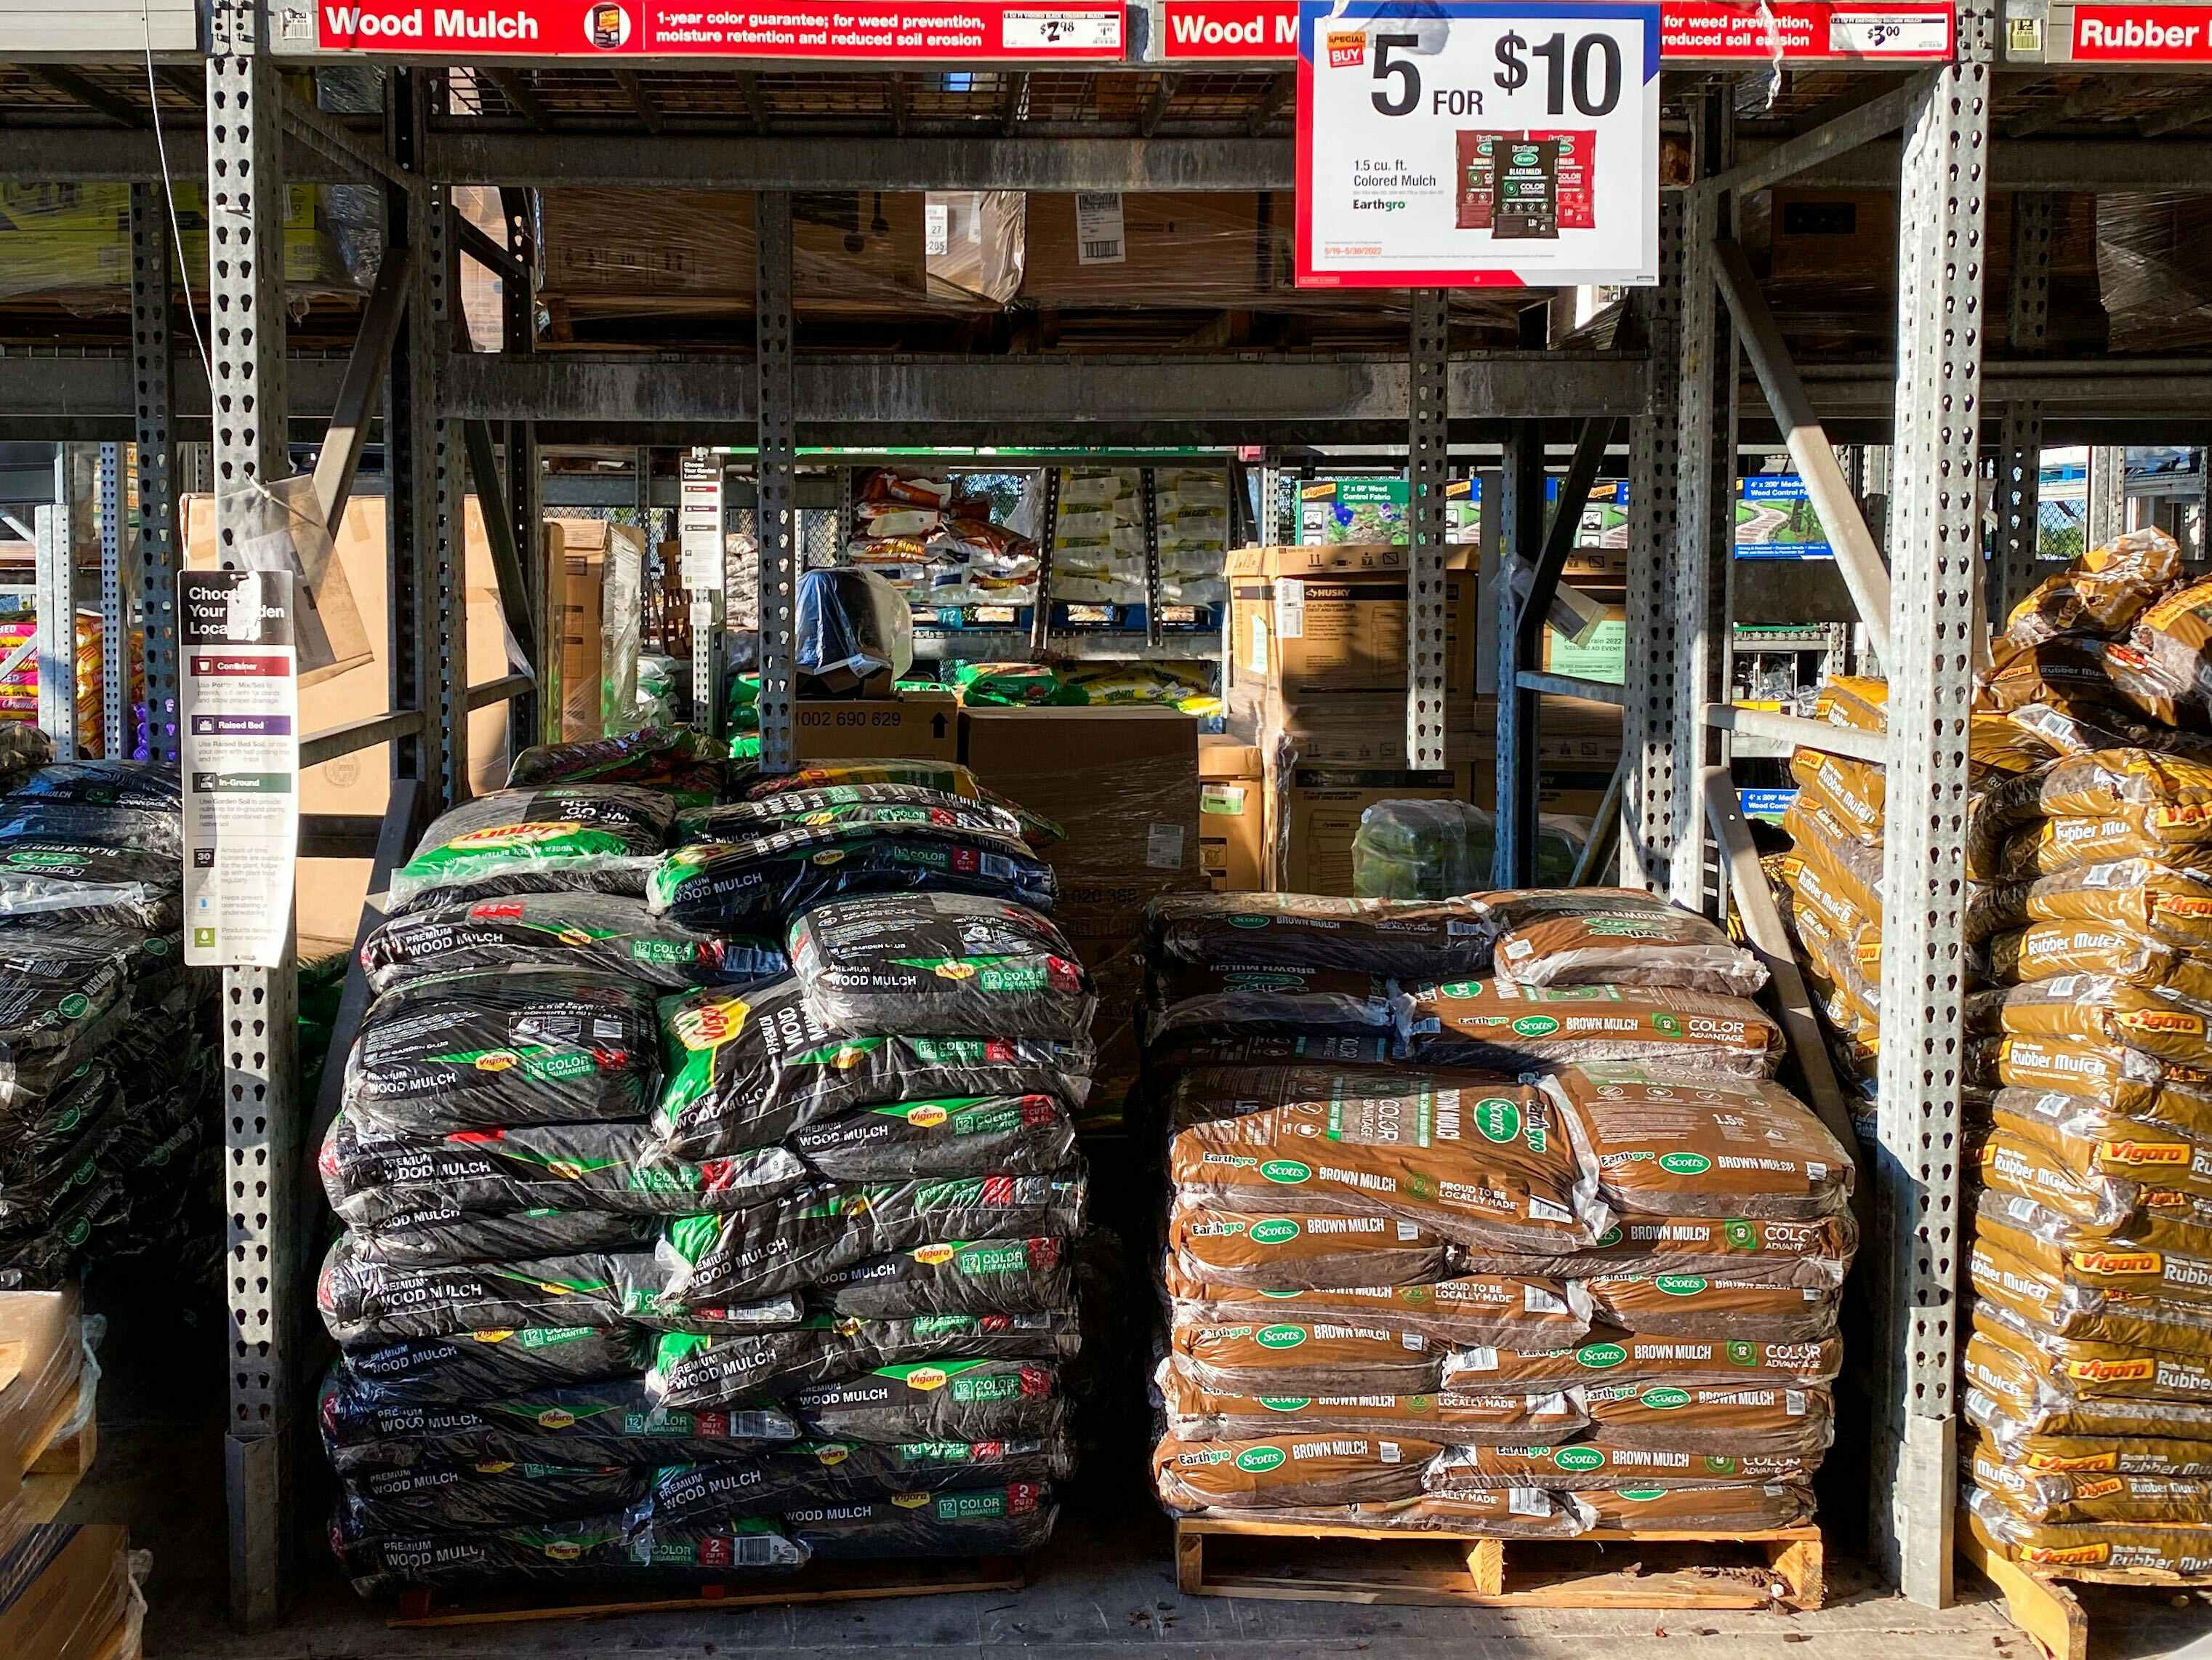 bags of earthgrow mulch stacked in the garden center